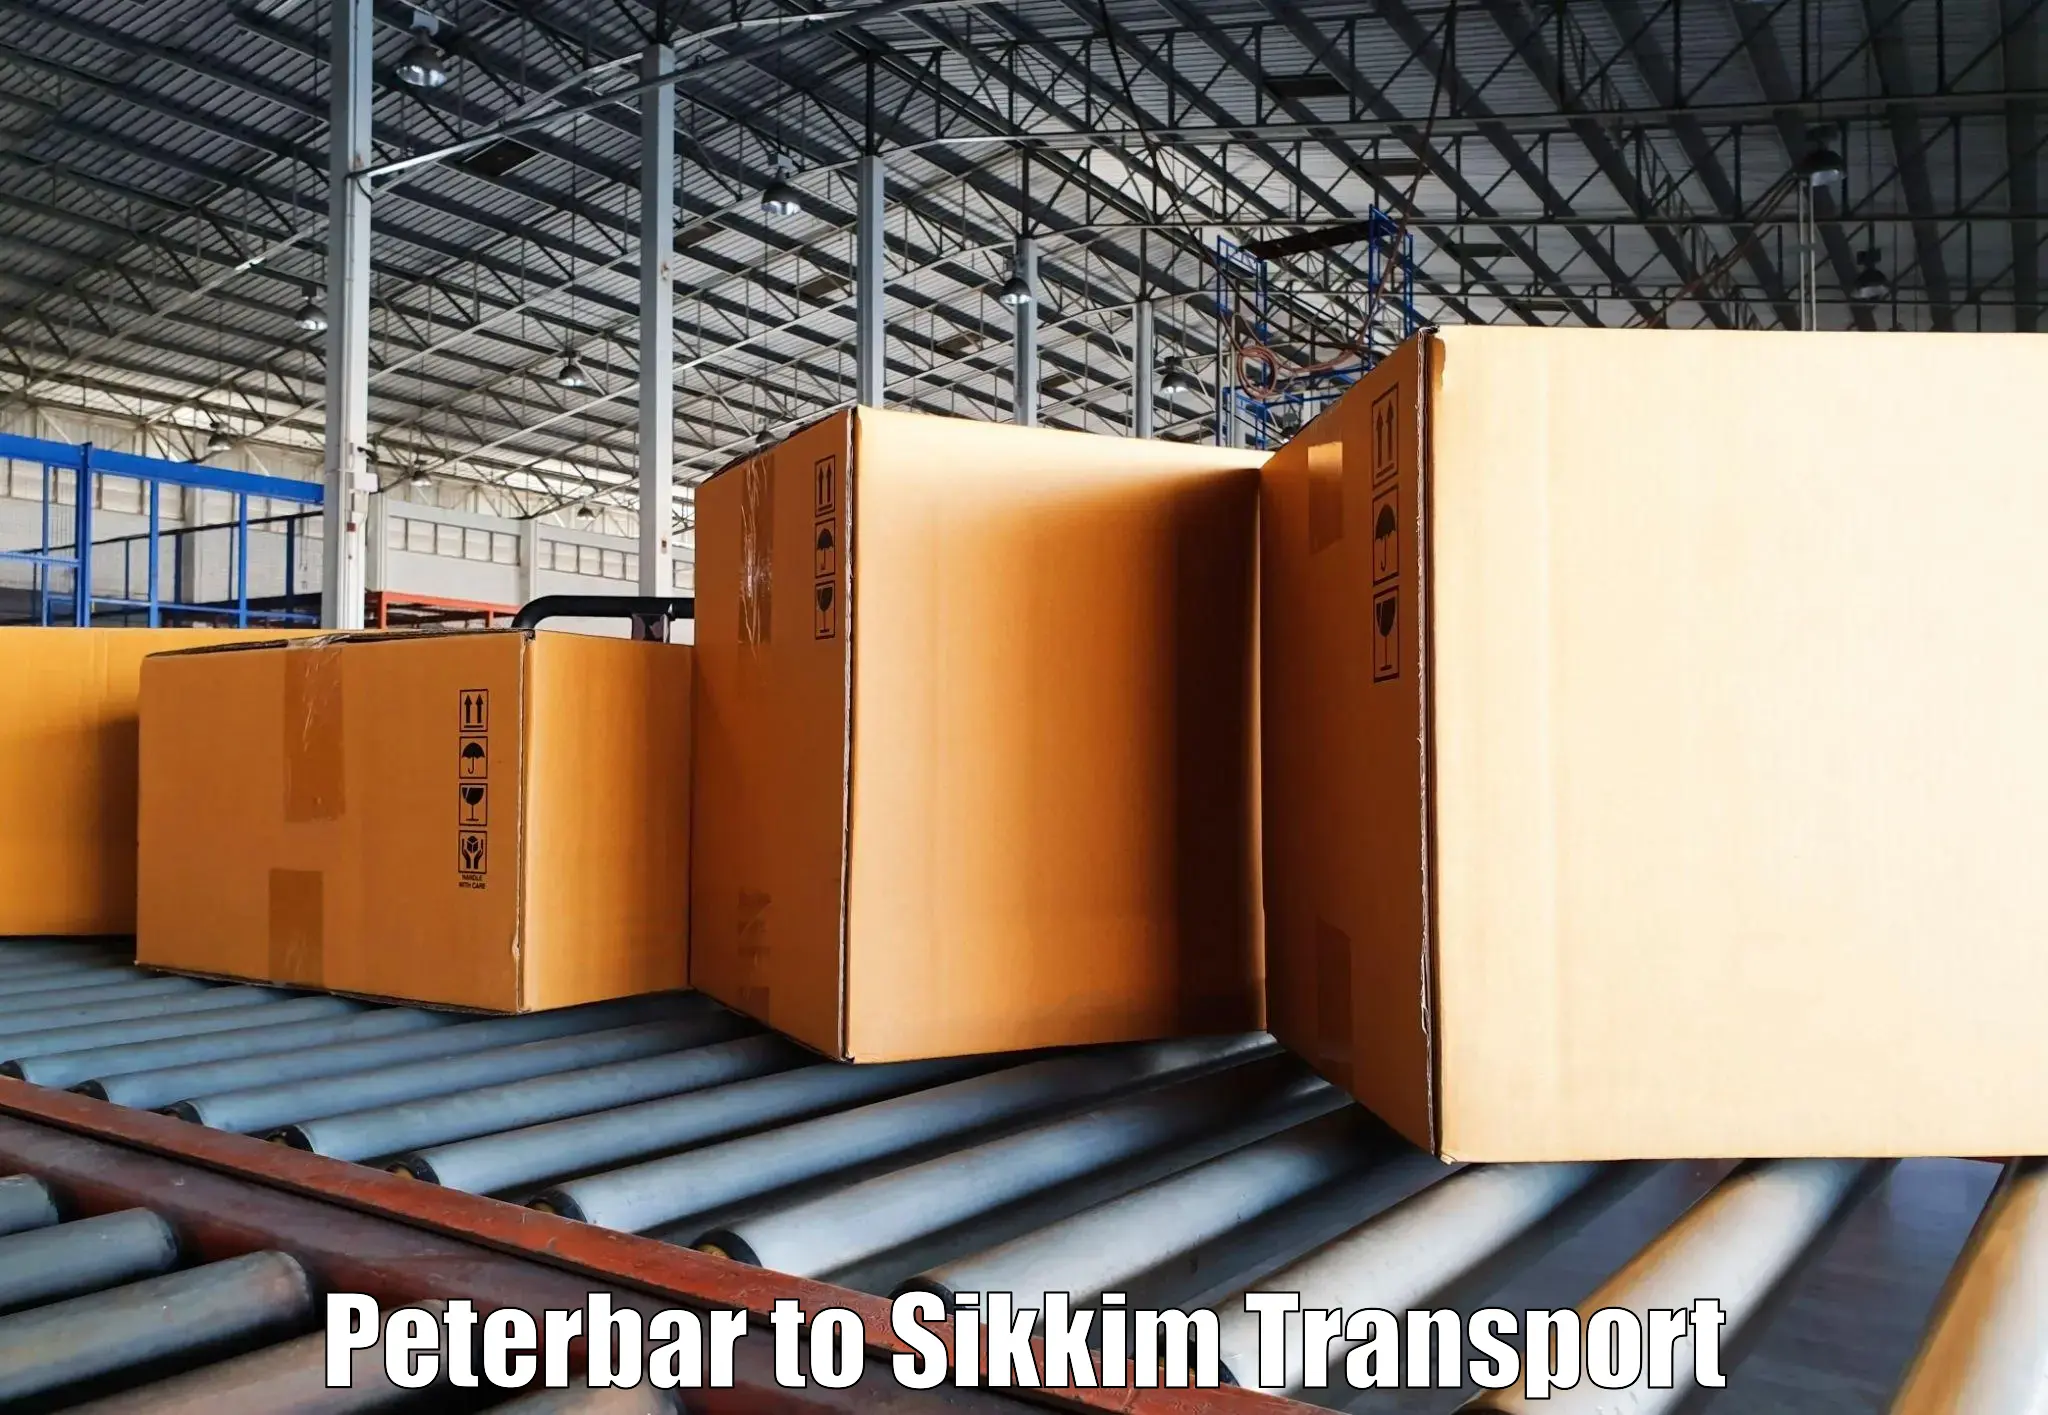 Two wheeler parcel service Peterbar to Sikkim